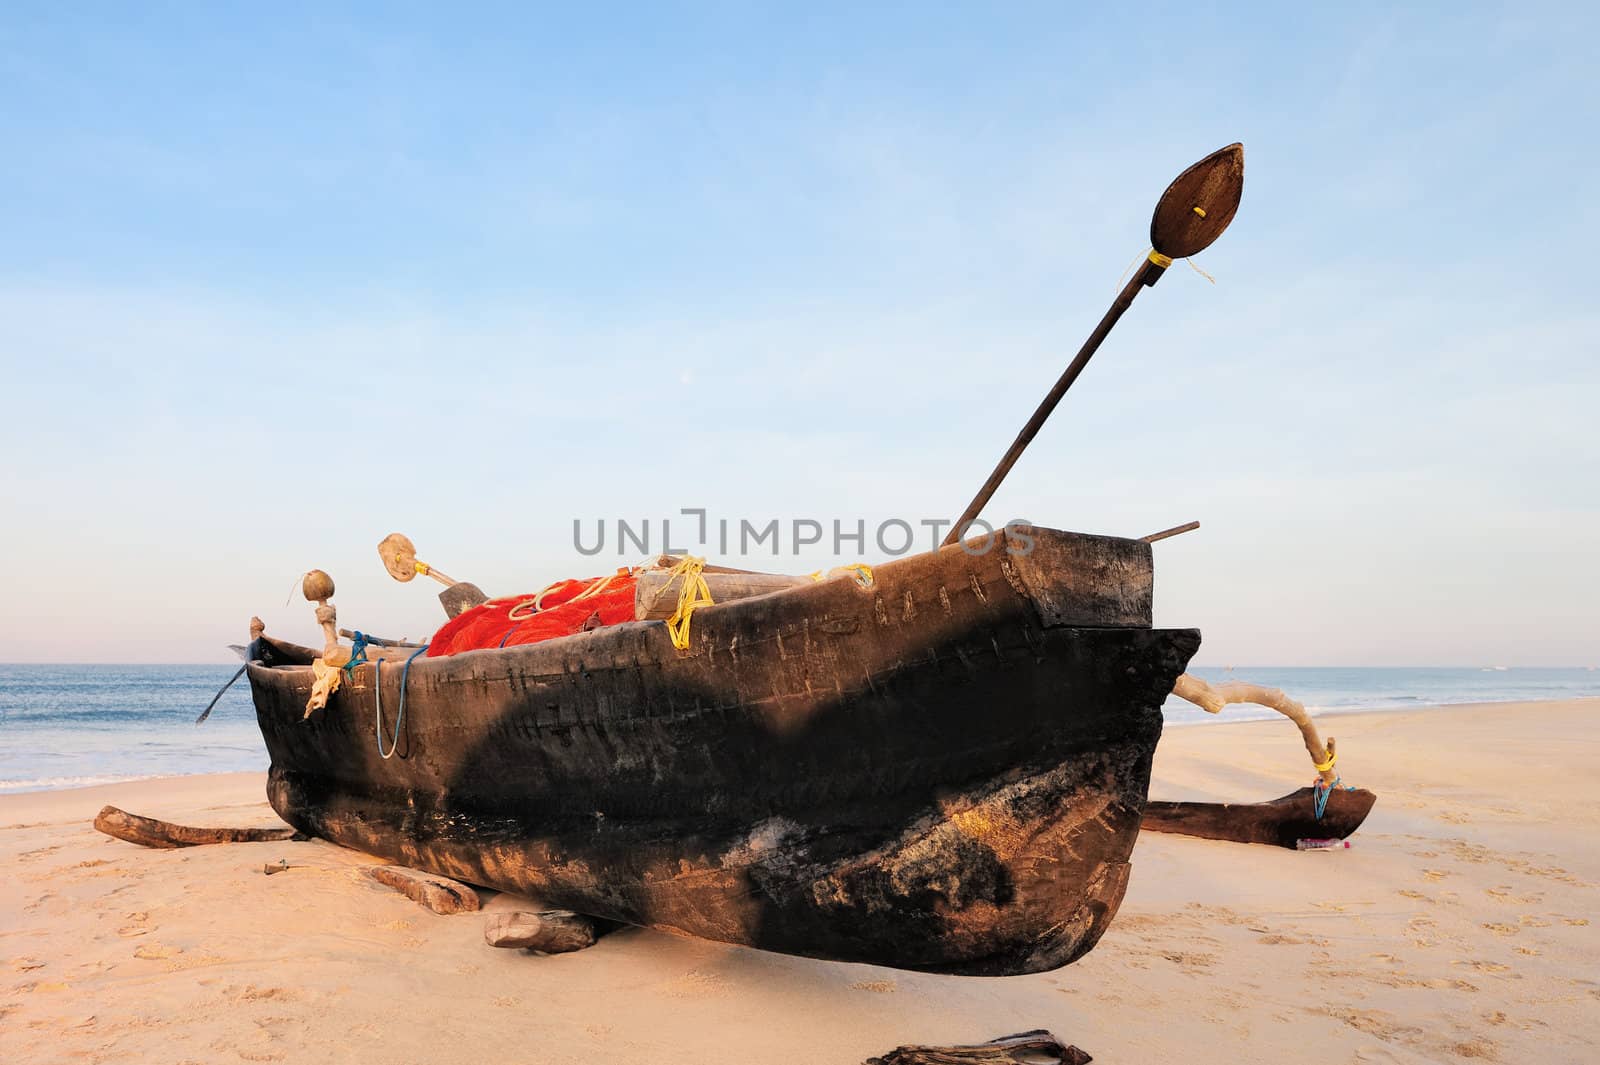 Old fishing boat on the sandy beach in Goa